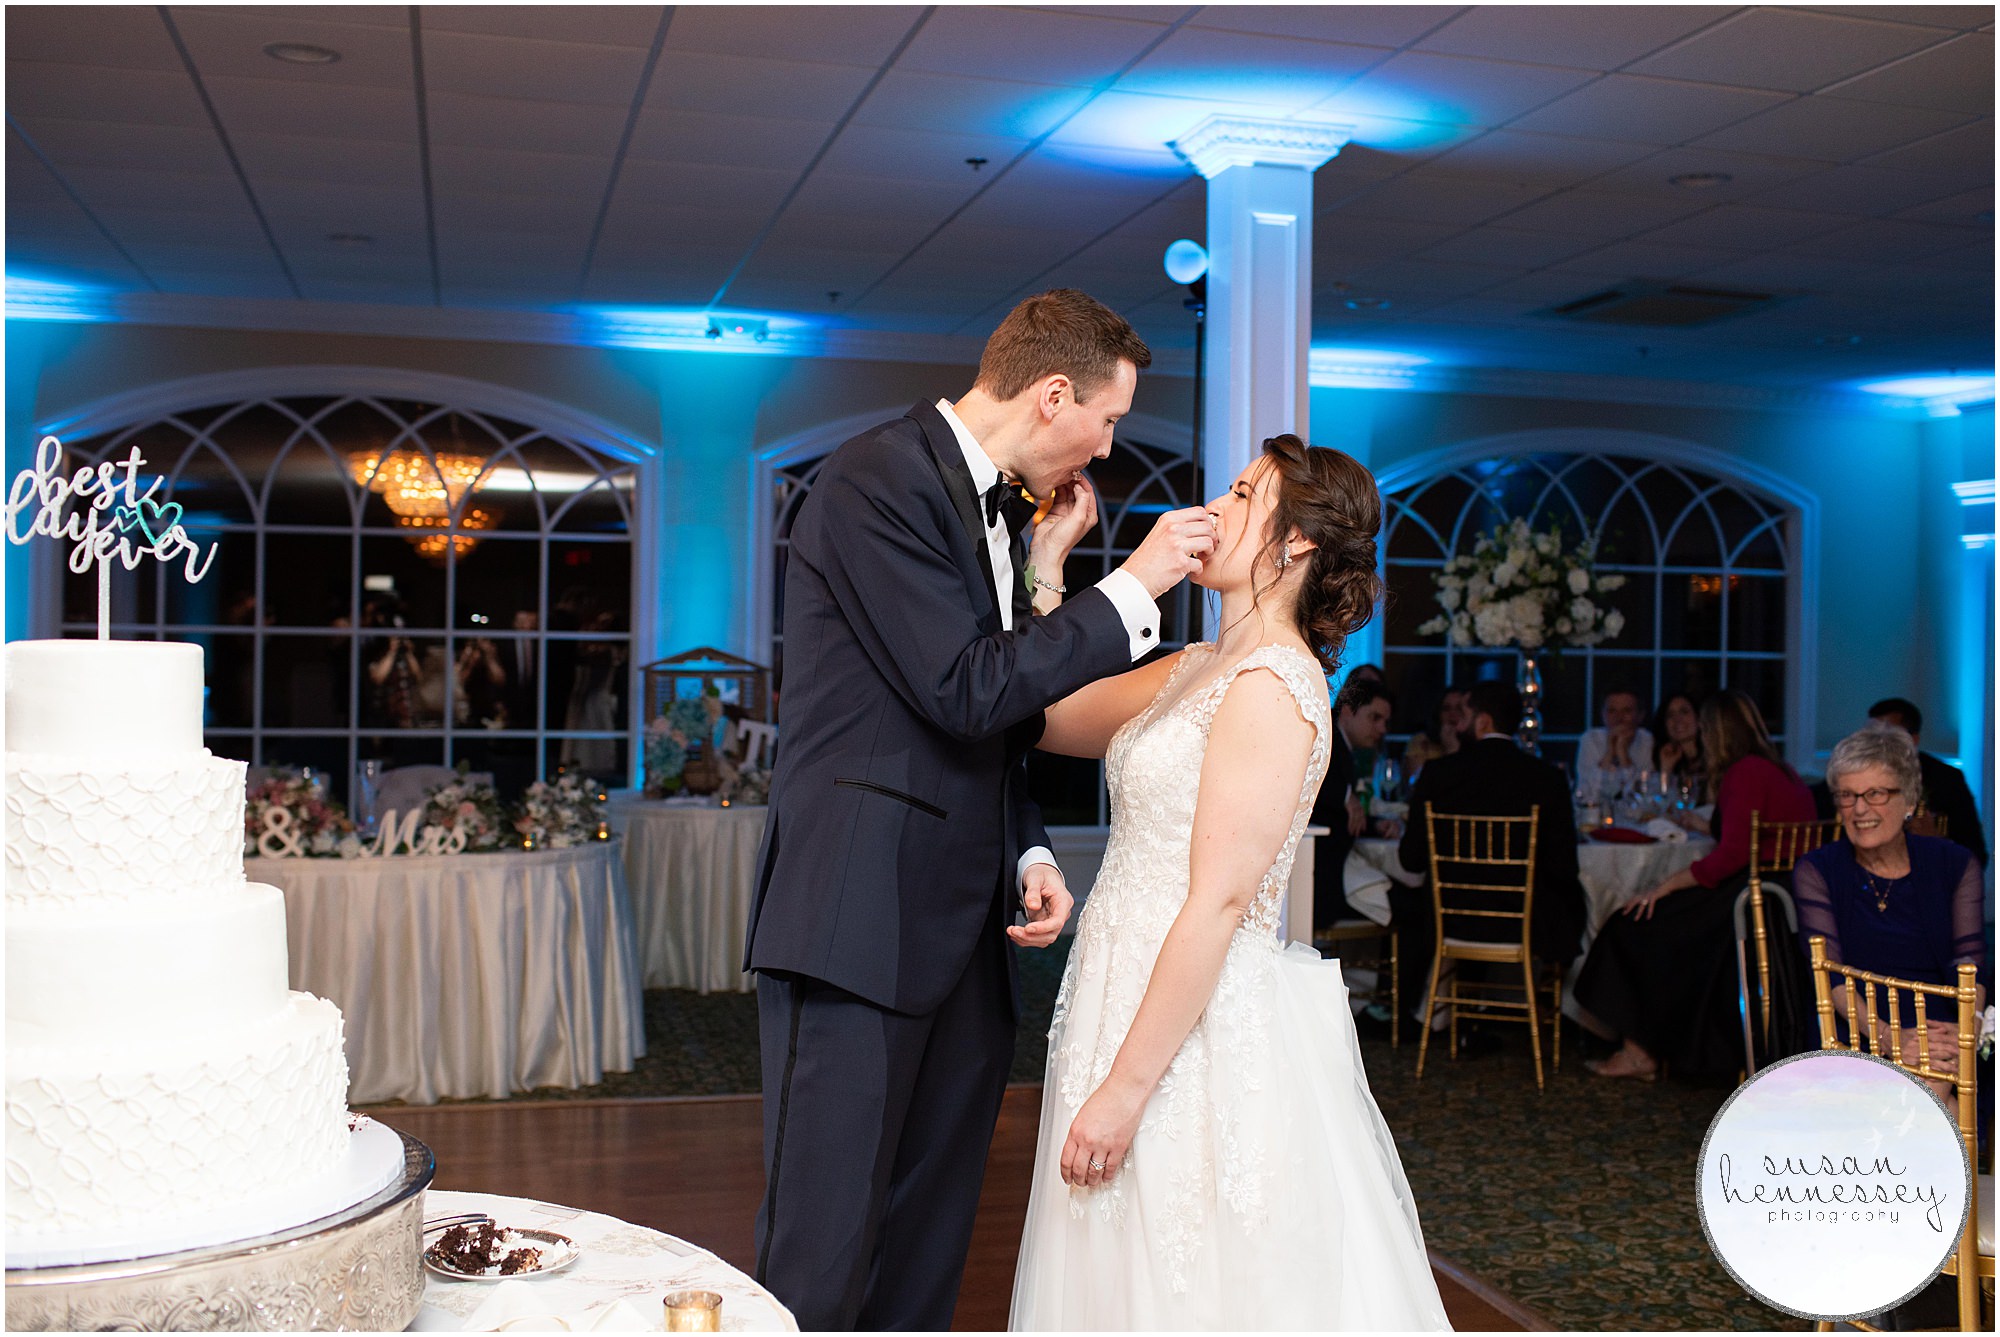 Bride and groom feed each other cake at their wedding reception. 